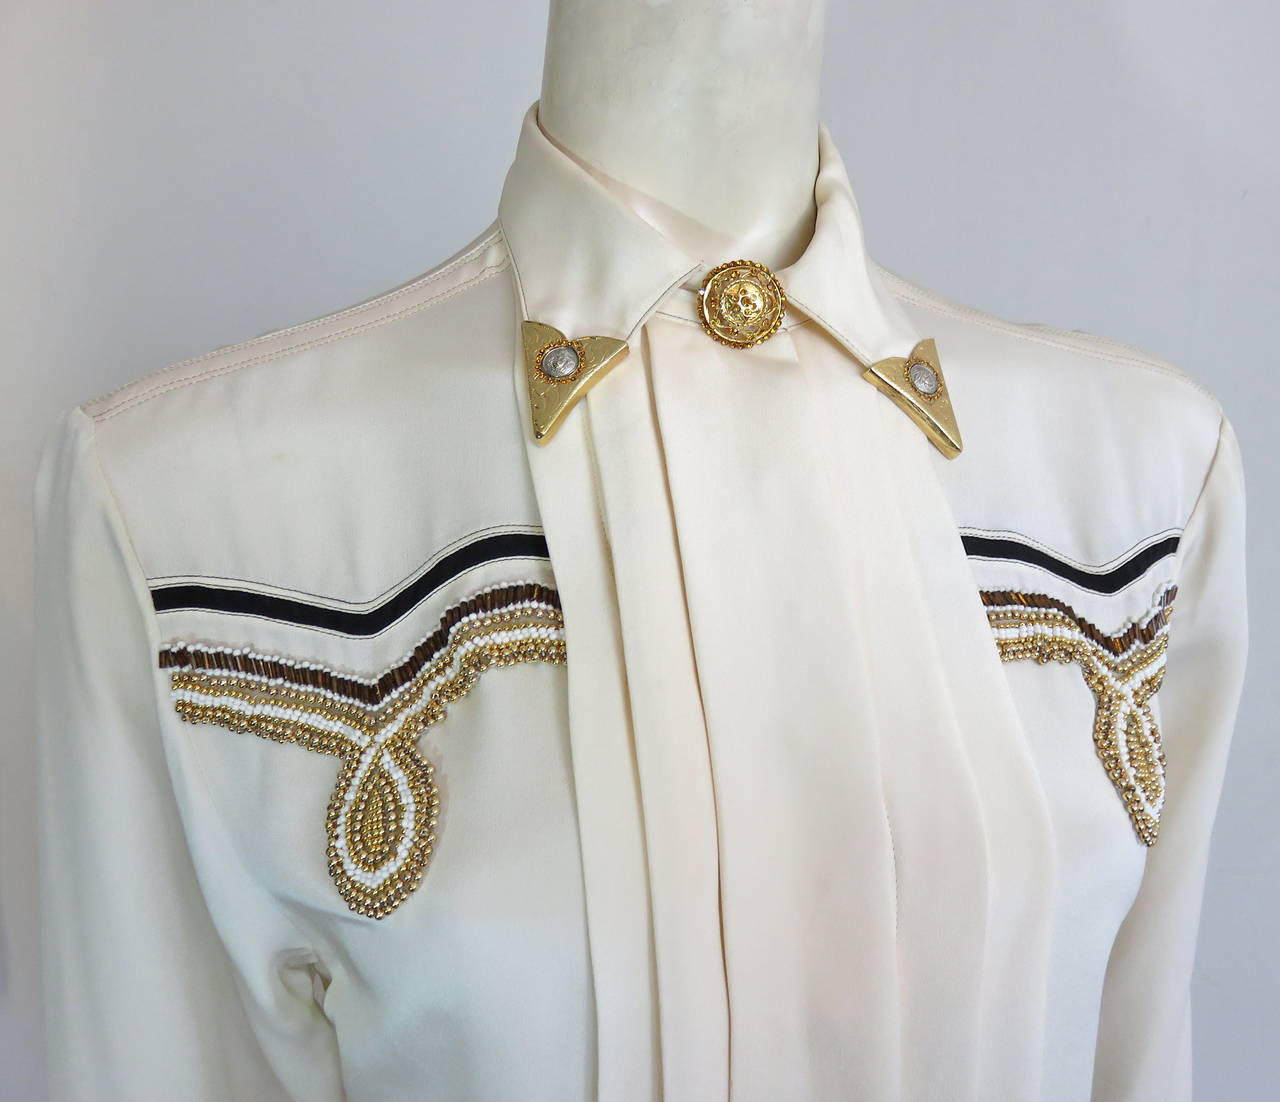 1992 GIANNI VERSACE COUTURE Beaded silk western shirt.

Stunning, 'Medusa' logo engraved metal hardware collar tips encircled with genuine, mini-crystals.

Dazzling, metal and crystal buttons at the front neck, and cuffs.

Pure, ivory silk